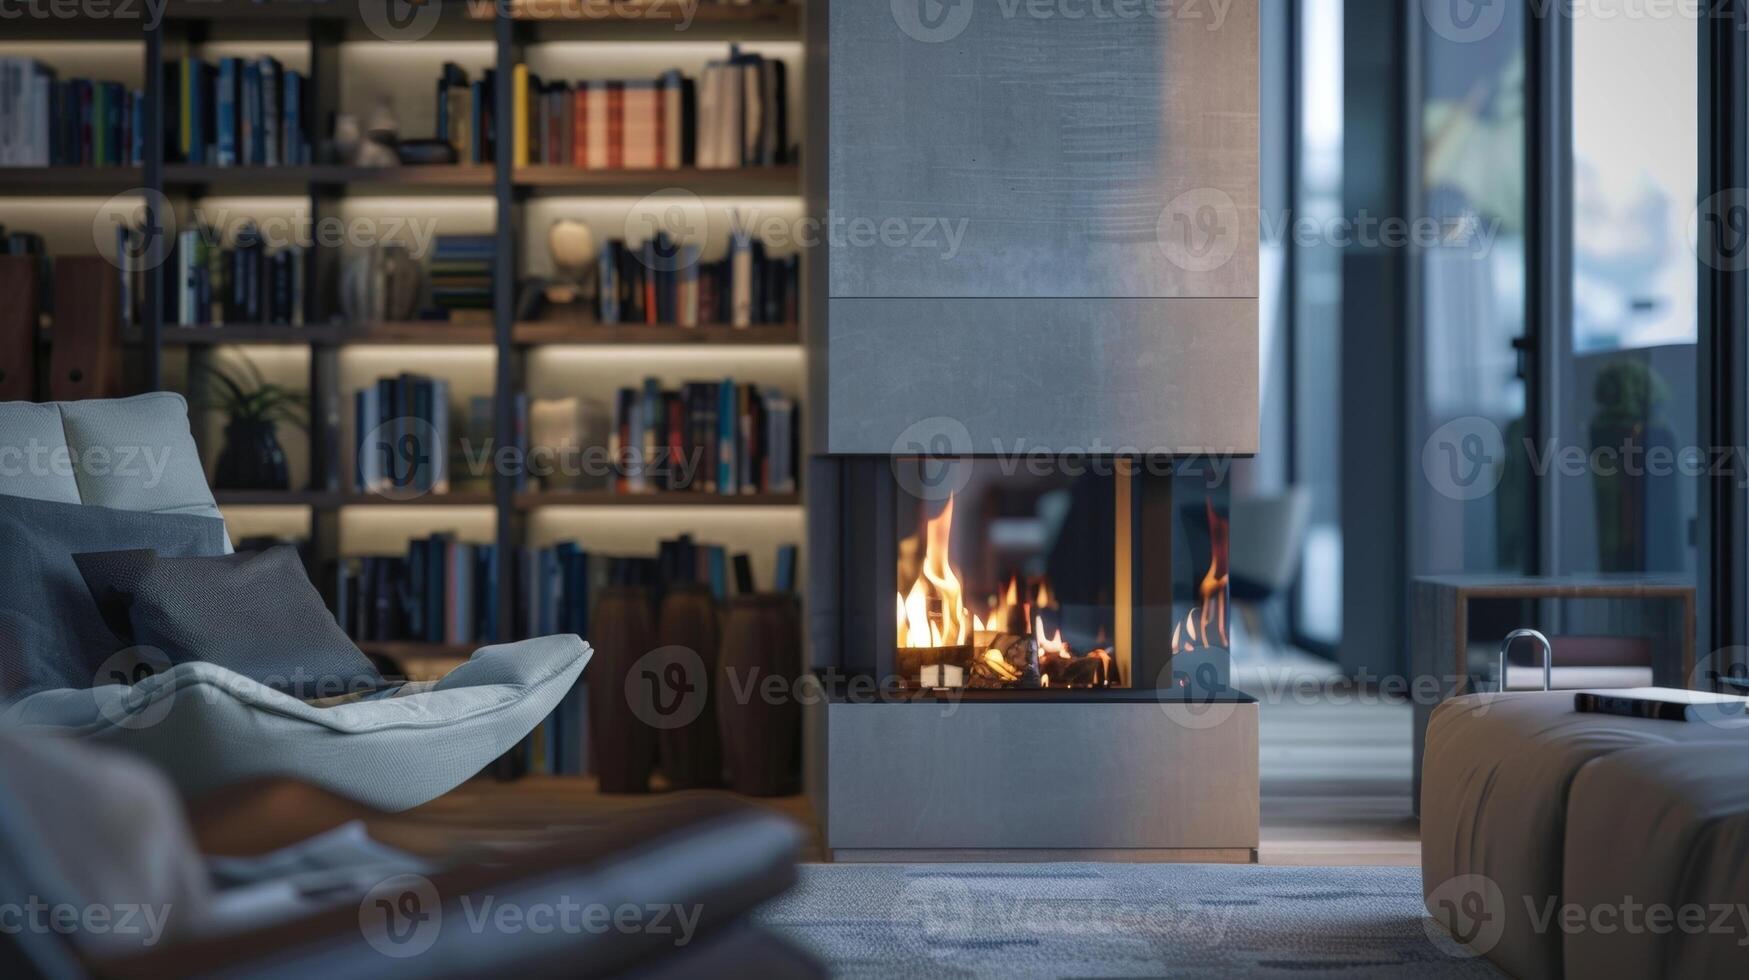 The sleek fireplace is complemented by a builtin bookshelf creating a cozy reading nook in the corner of the sleek and stylish apartment. 2d flat cartoon photo